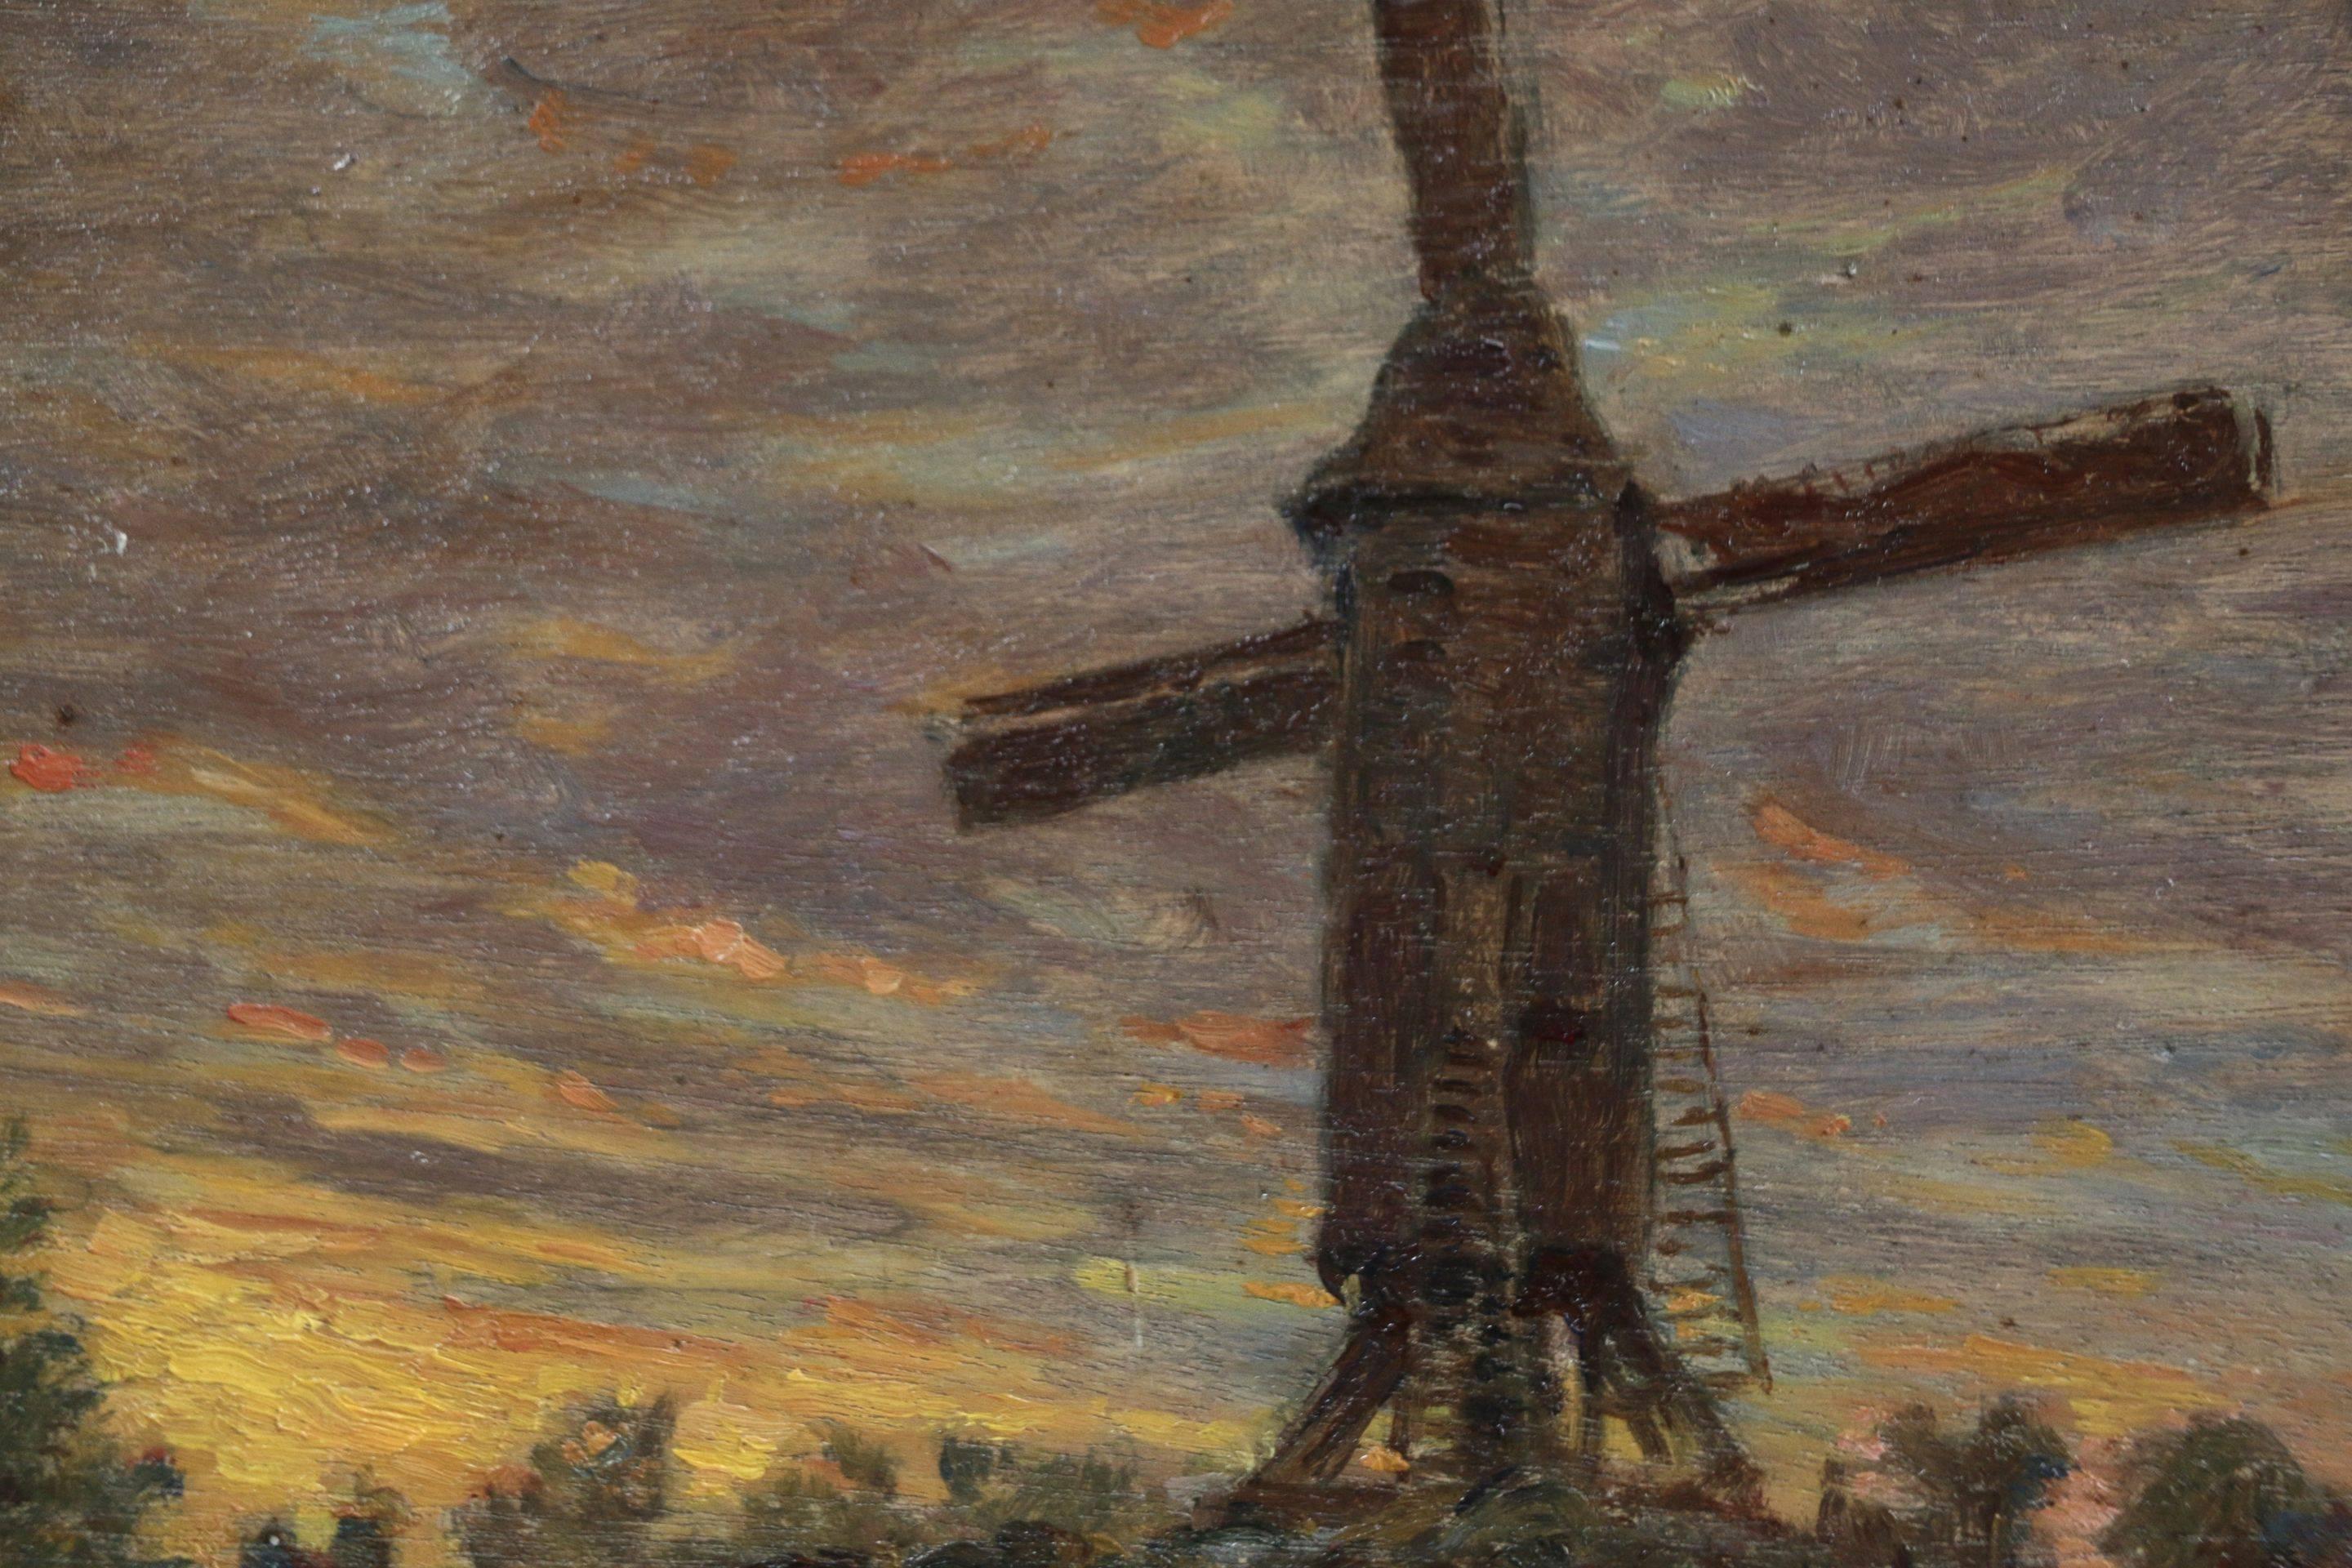 Windmill at Sunset - Brown Landscape Painting by Henri Duhem